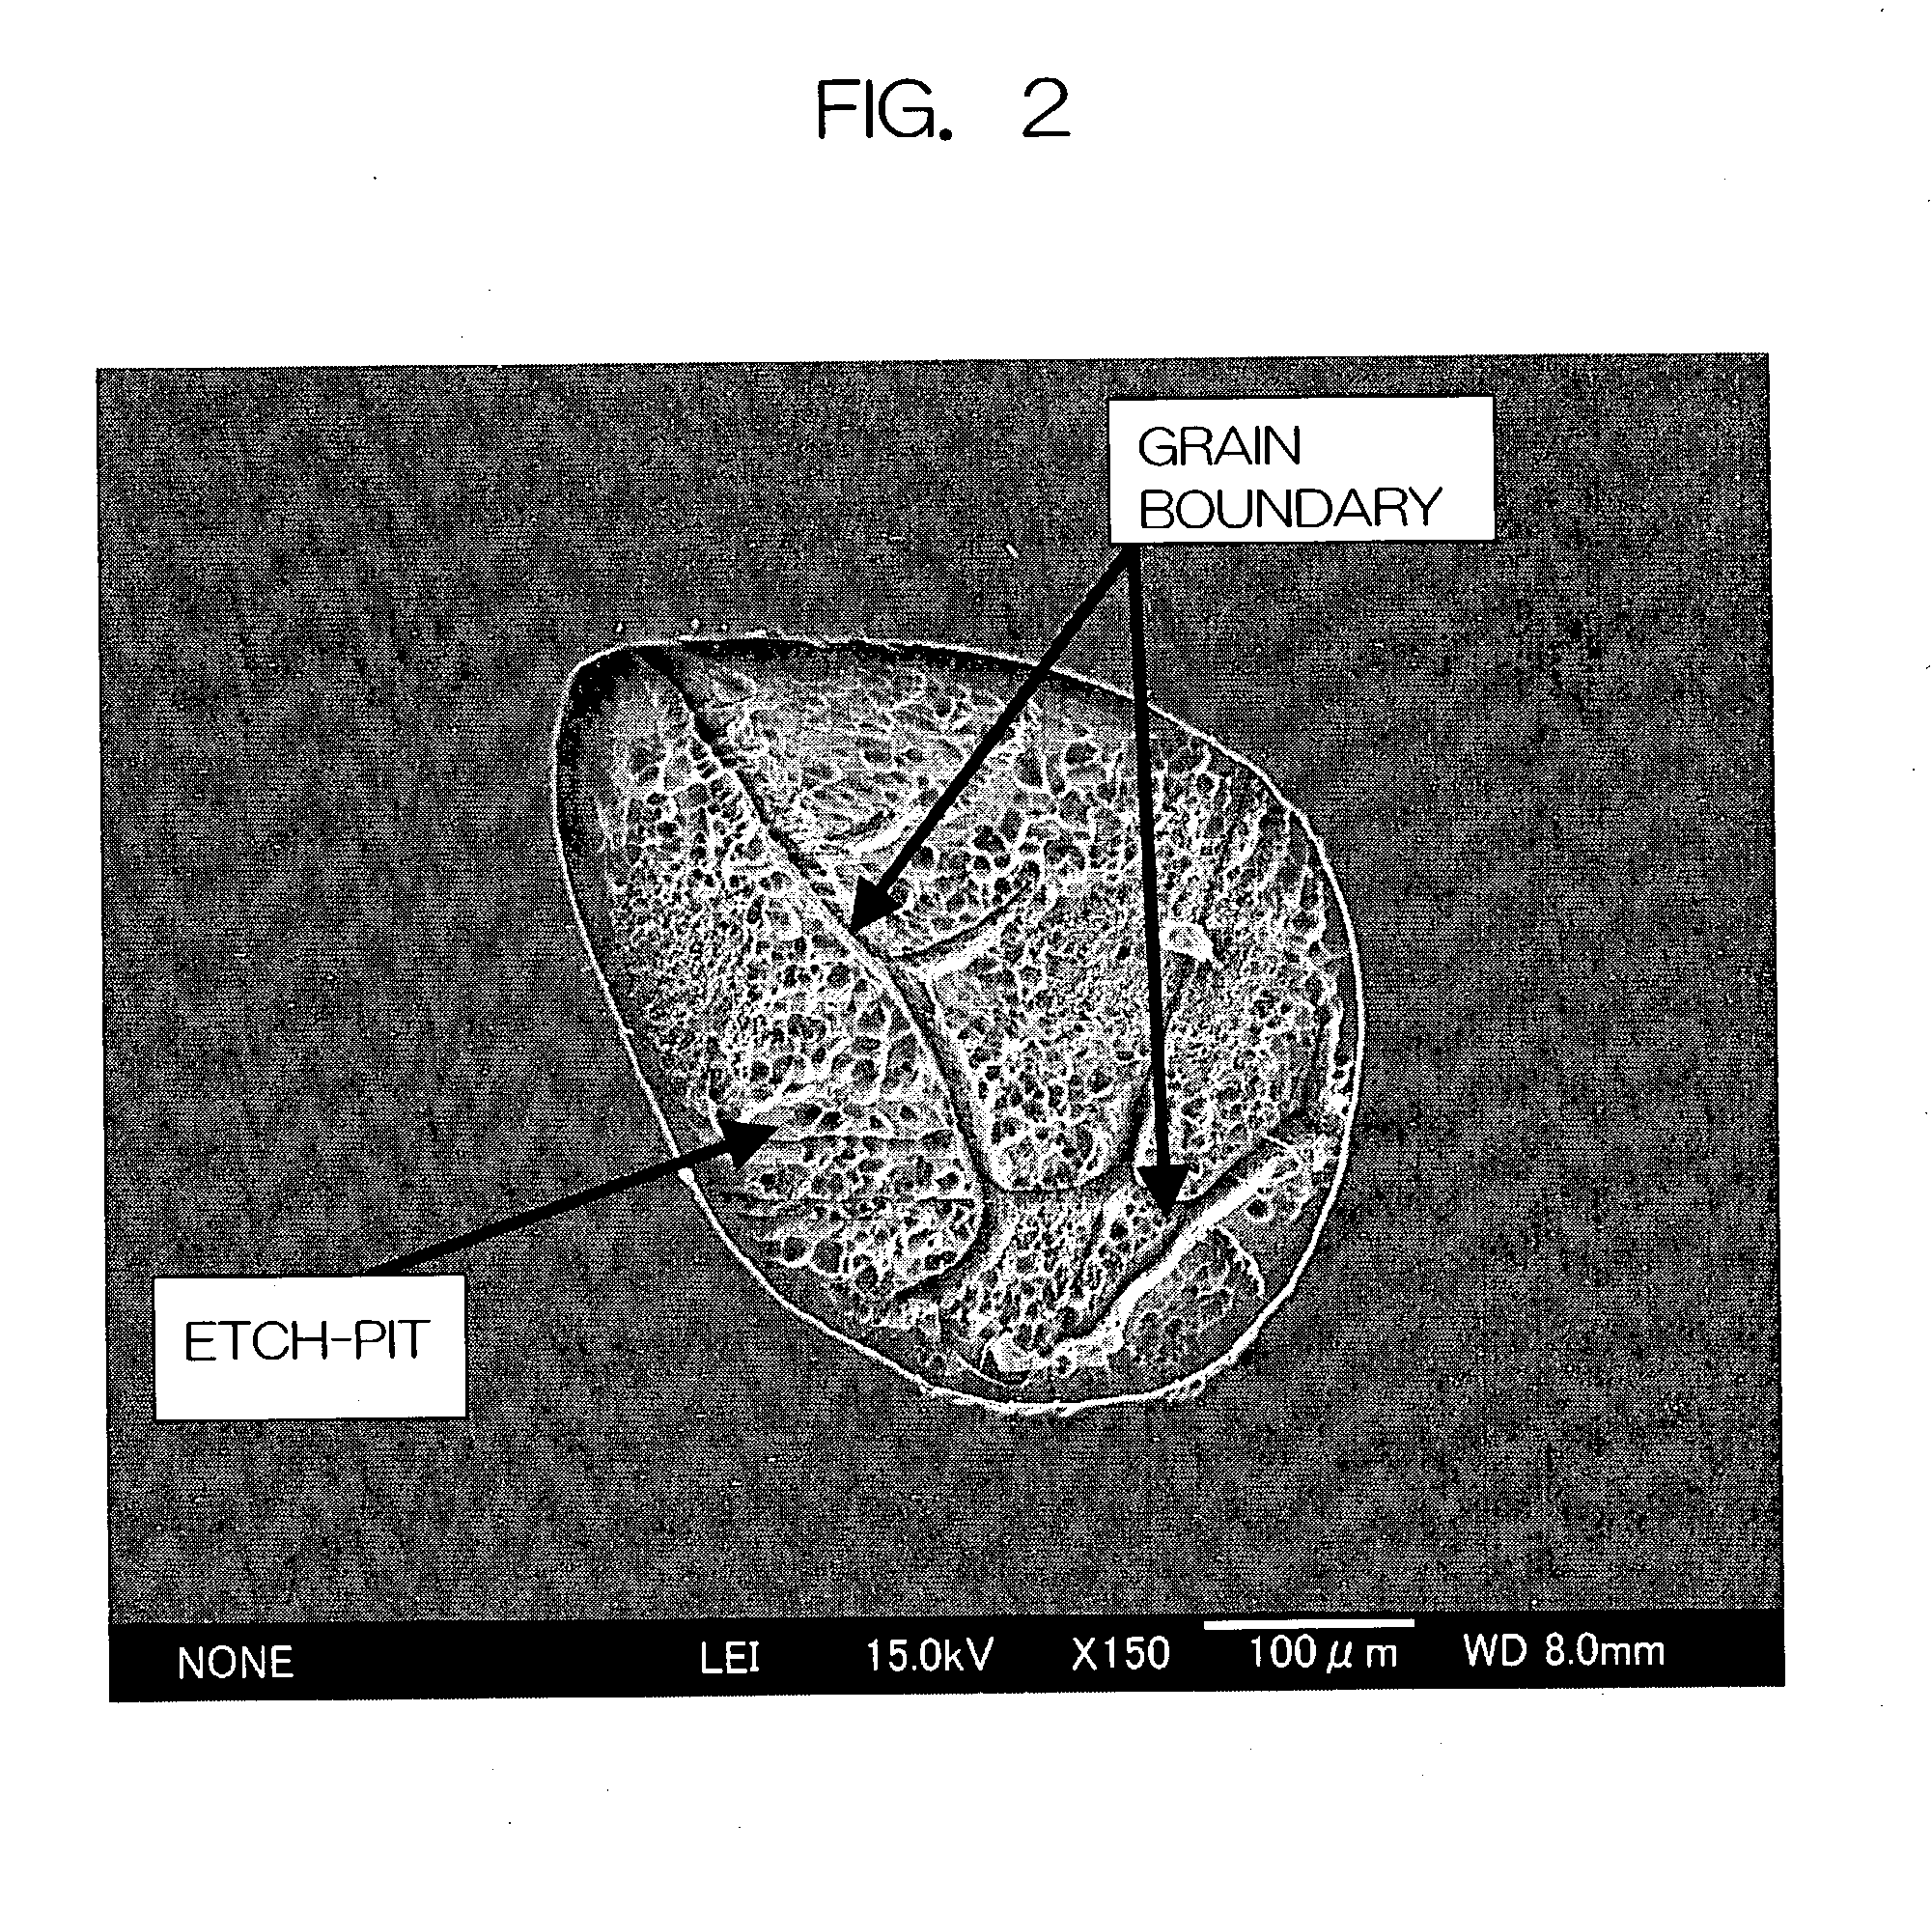 Apparatus and method for manufacturing semiconductor grains